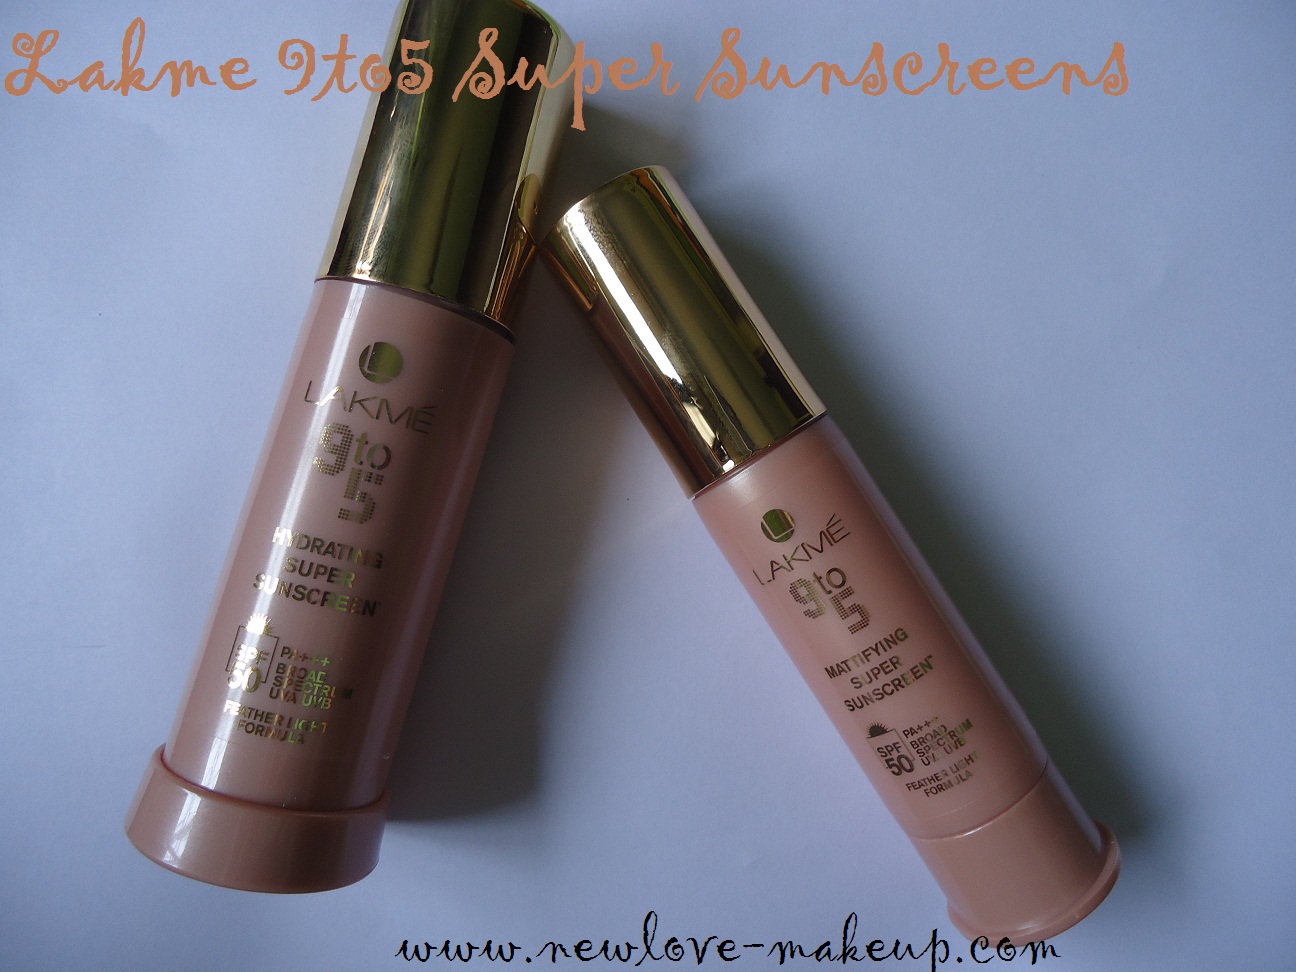 Lakme 9 to 5 Super Sunscreens SPF50-Hydrating and Mattifying Review